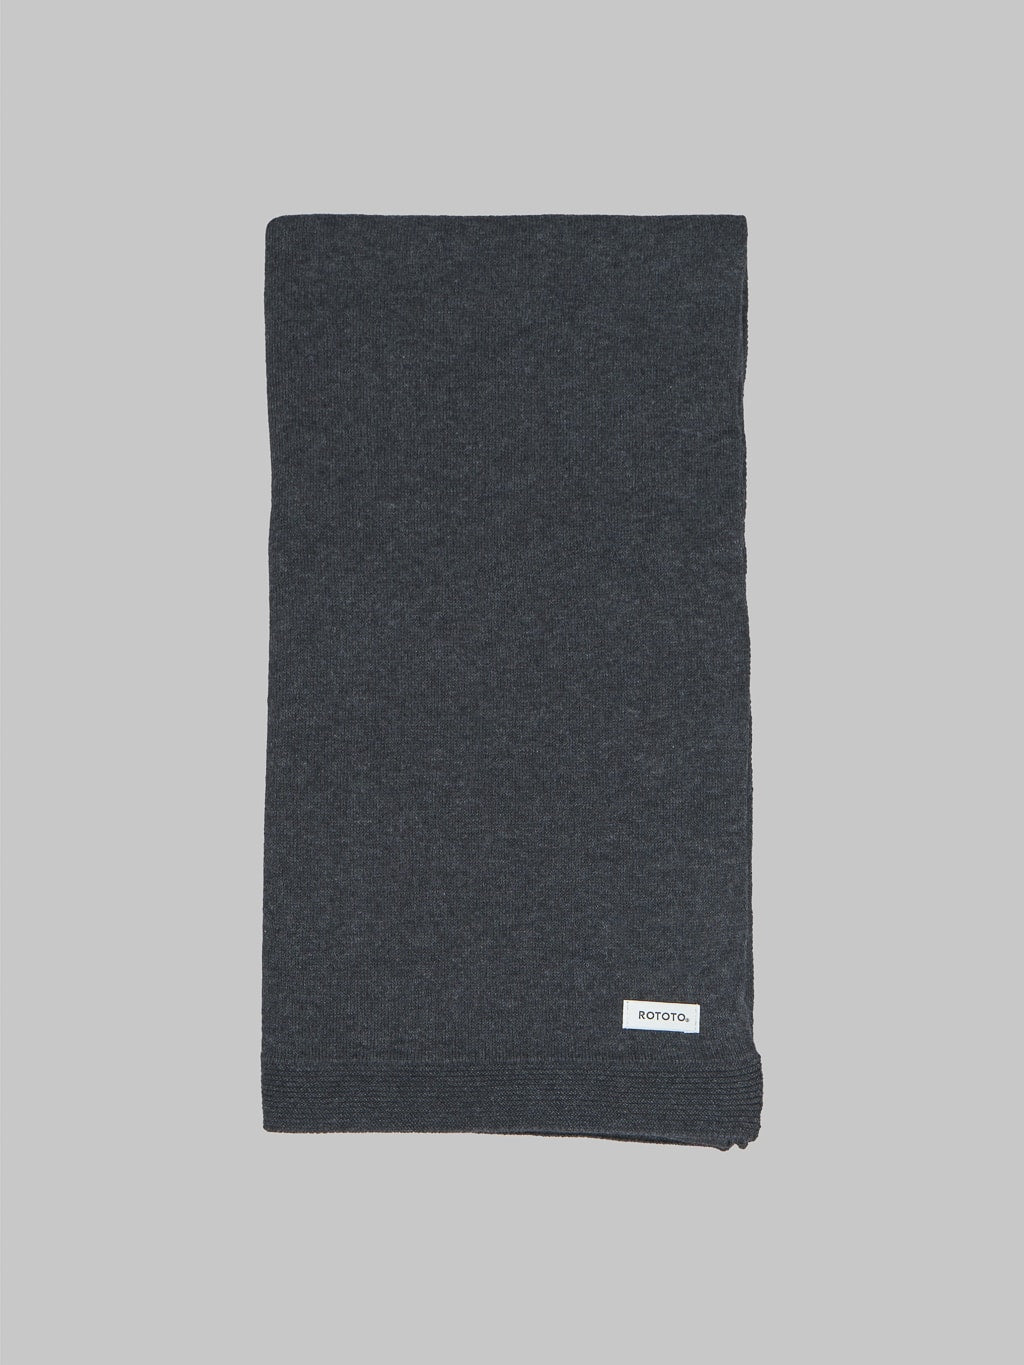 Rototo Cotton Cashmere Muffler Charcoal made in japan